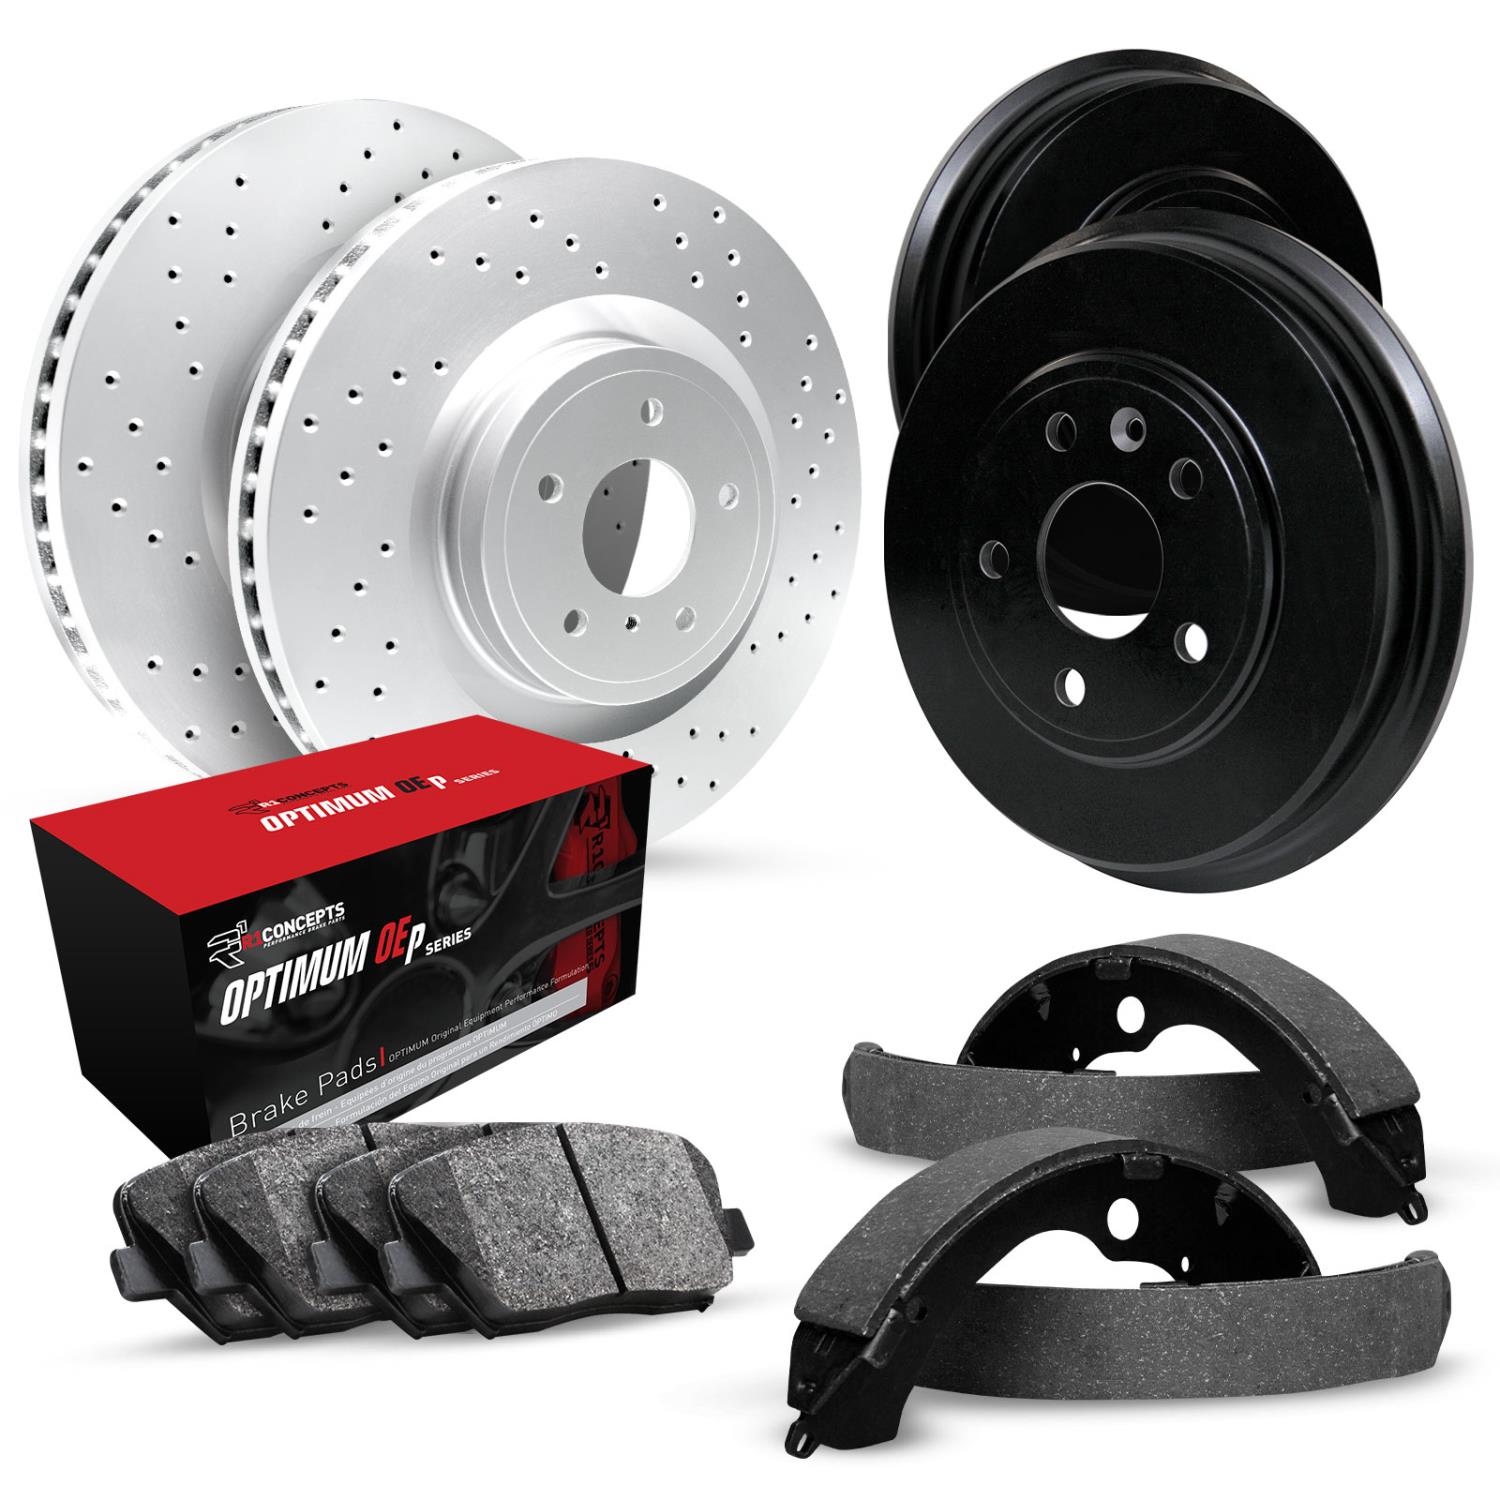 GEO-Carbon Drilled Brake Rotor & Drum Set w/Optimum OE Pads & Shoes, 1994-1995 GM, Position: Front & Rear